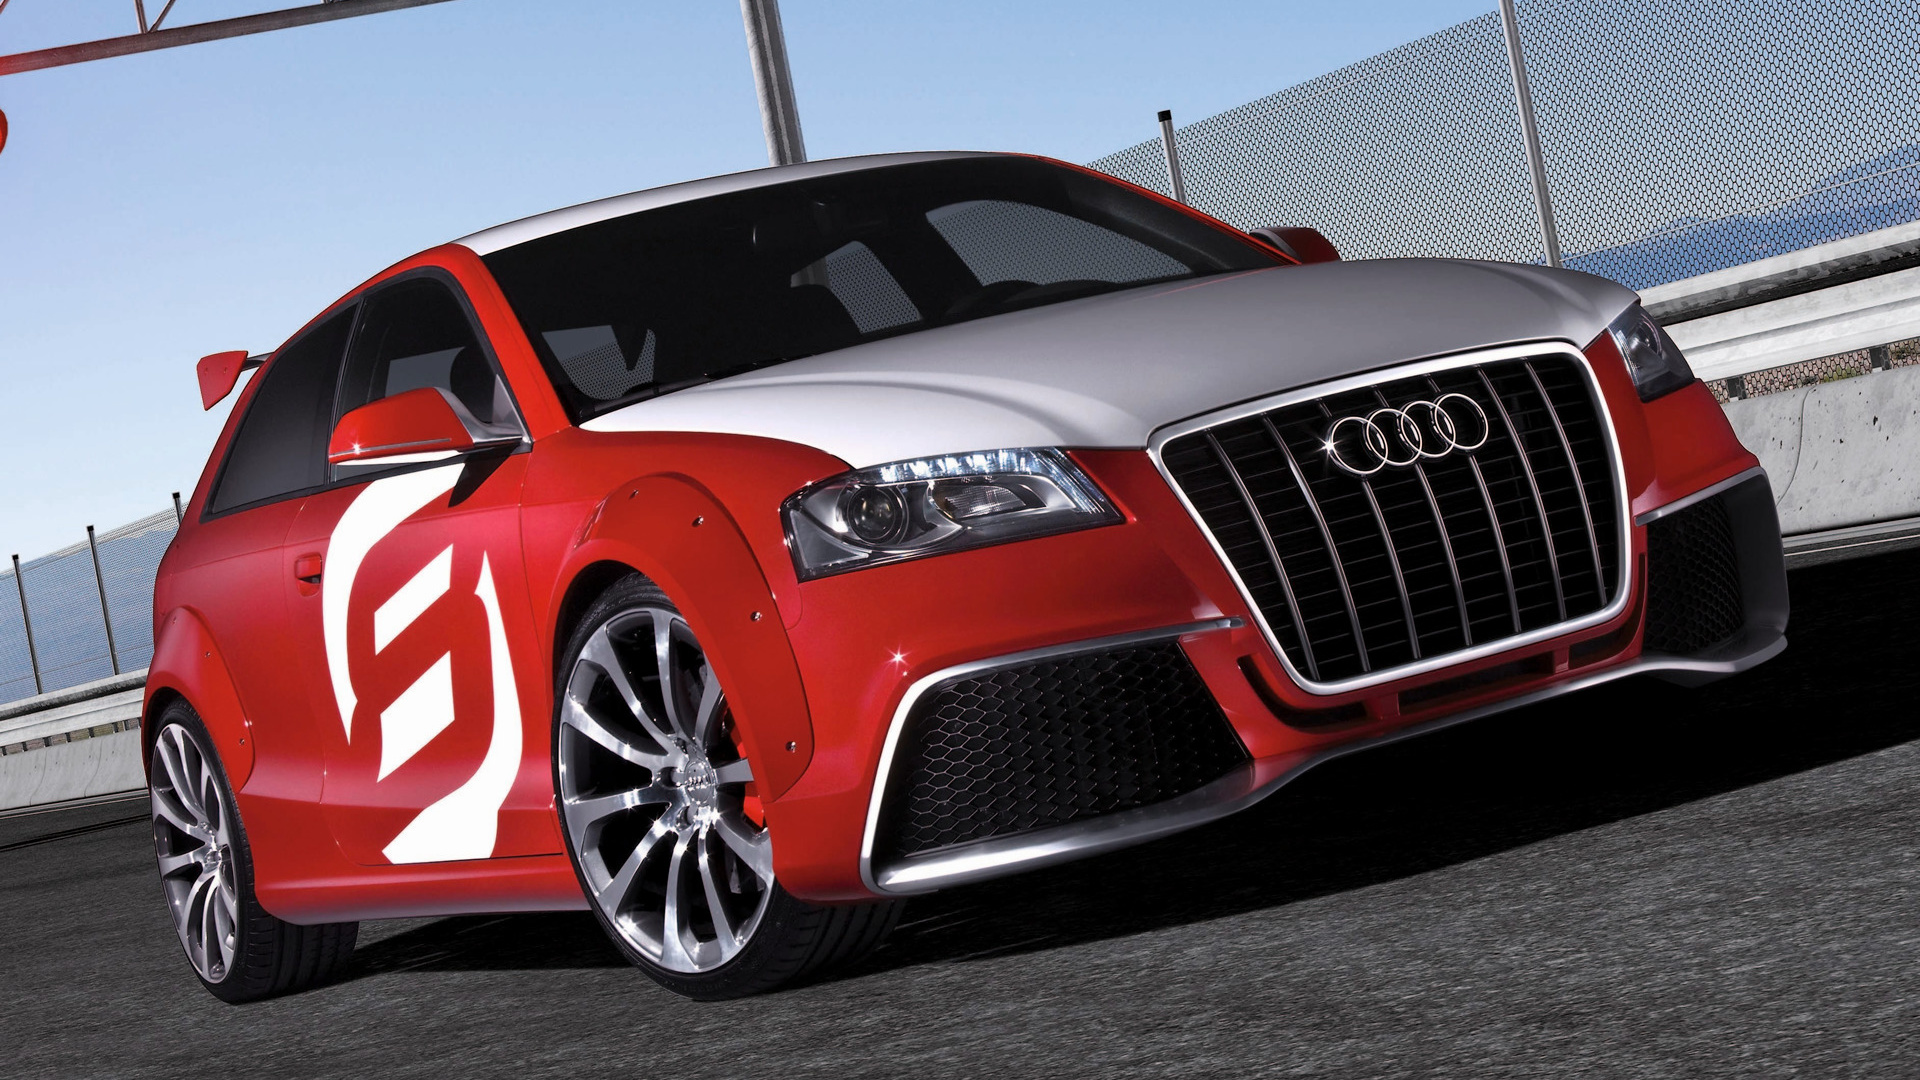 2008 Audi A3 ( 8P ) by Sportec - Free high resolution car images